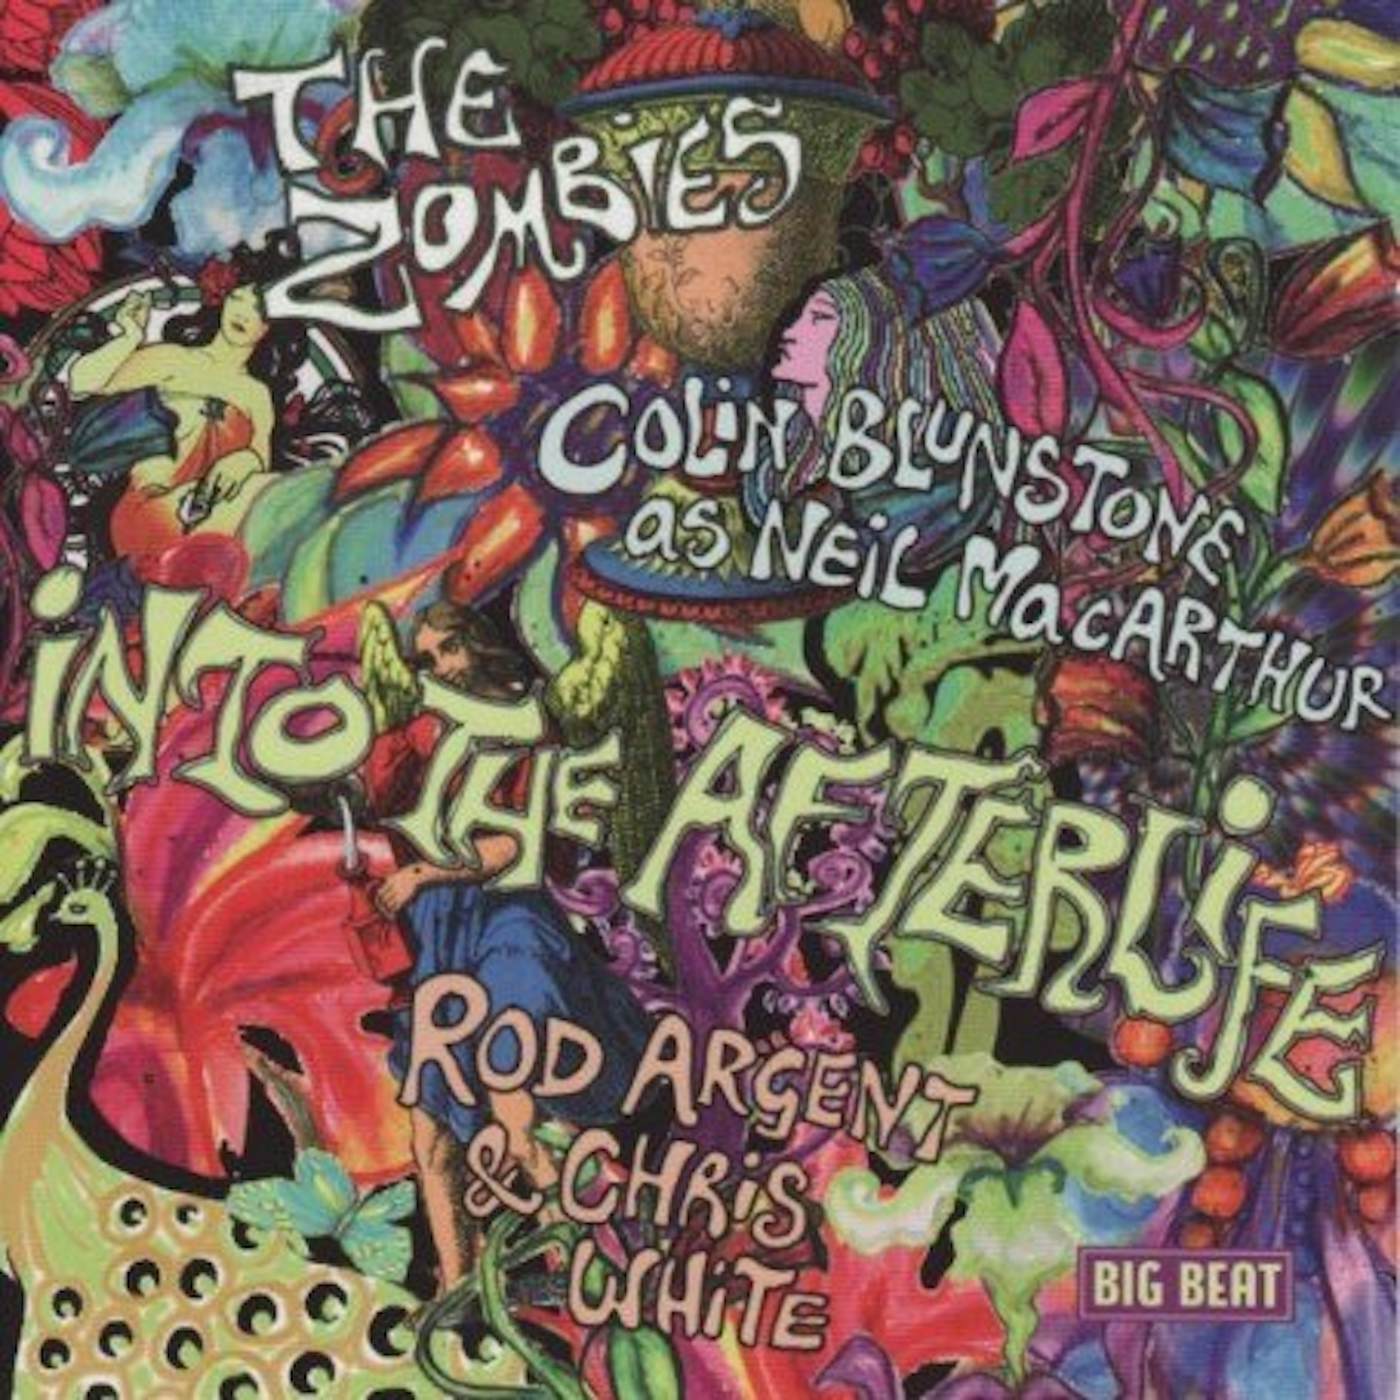 The Zombies INTO THE AFTERLIFE CD